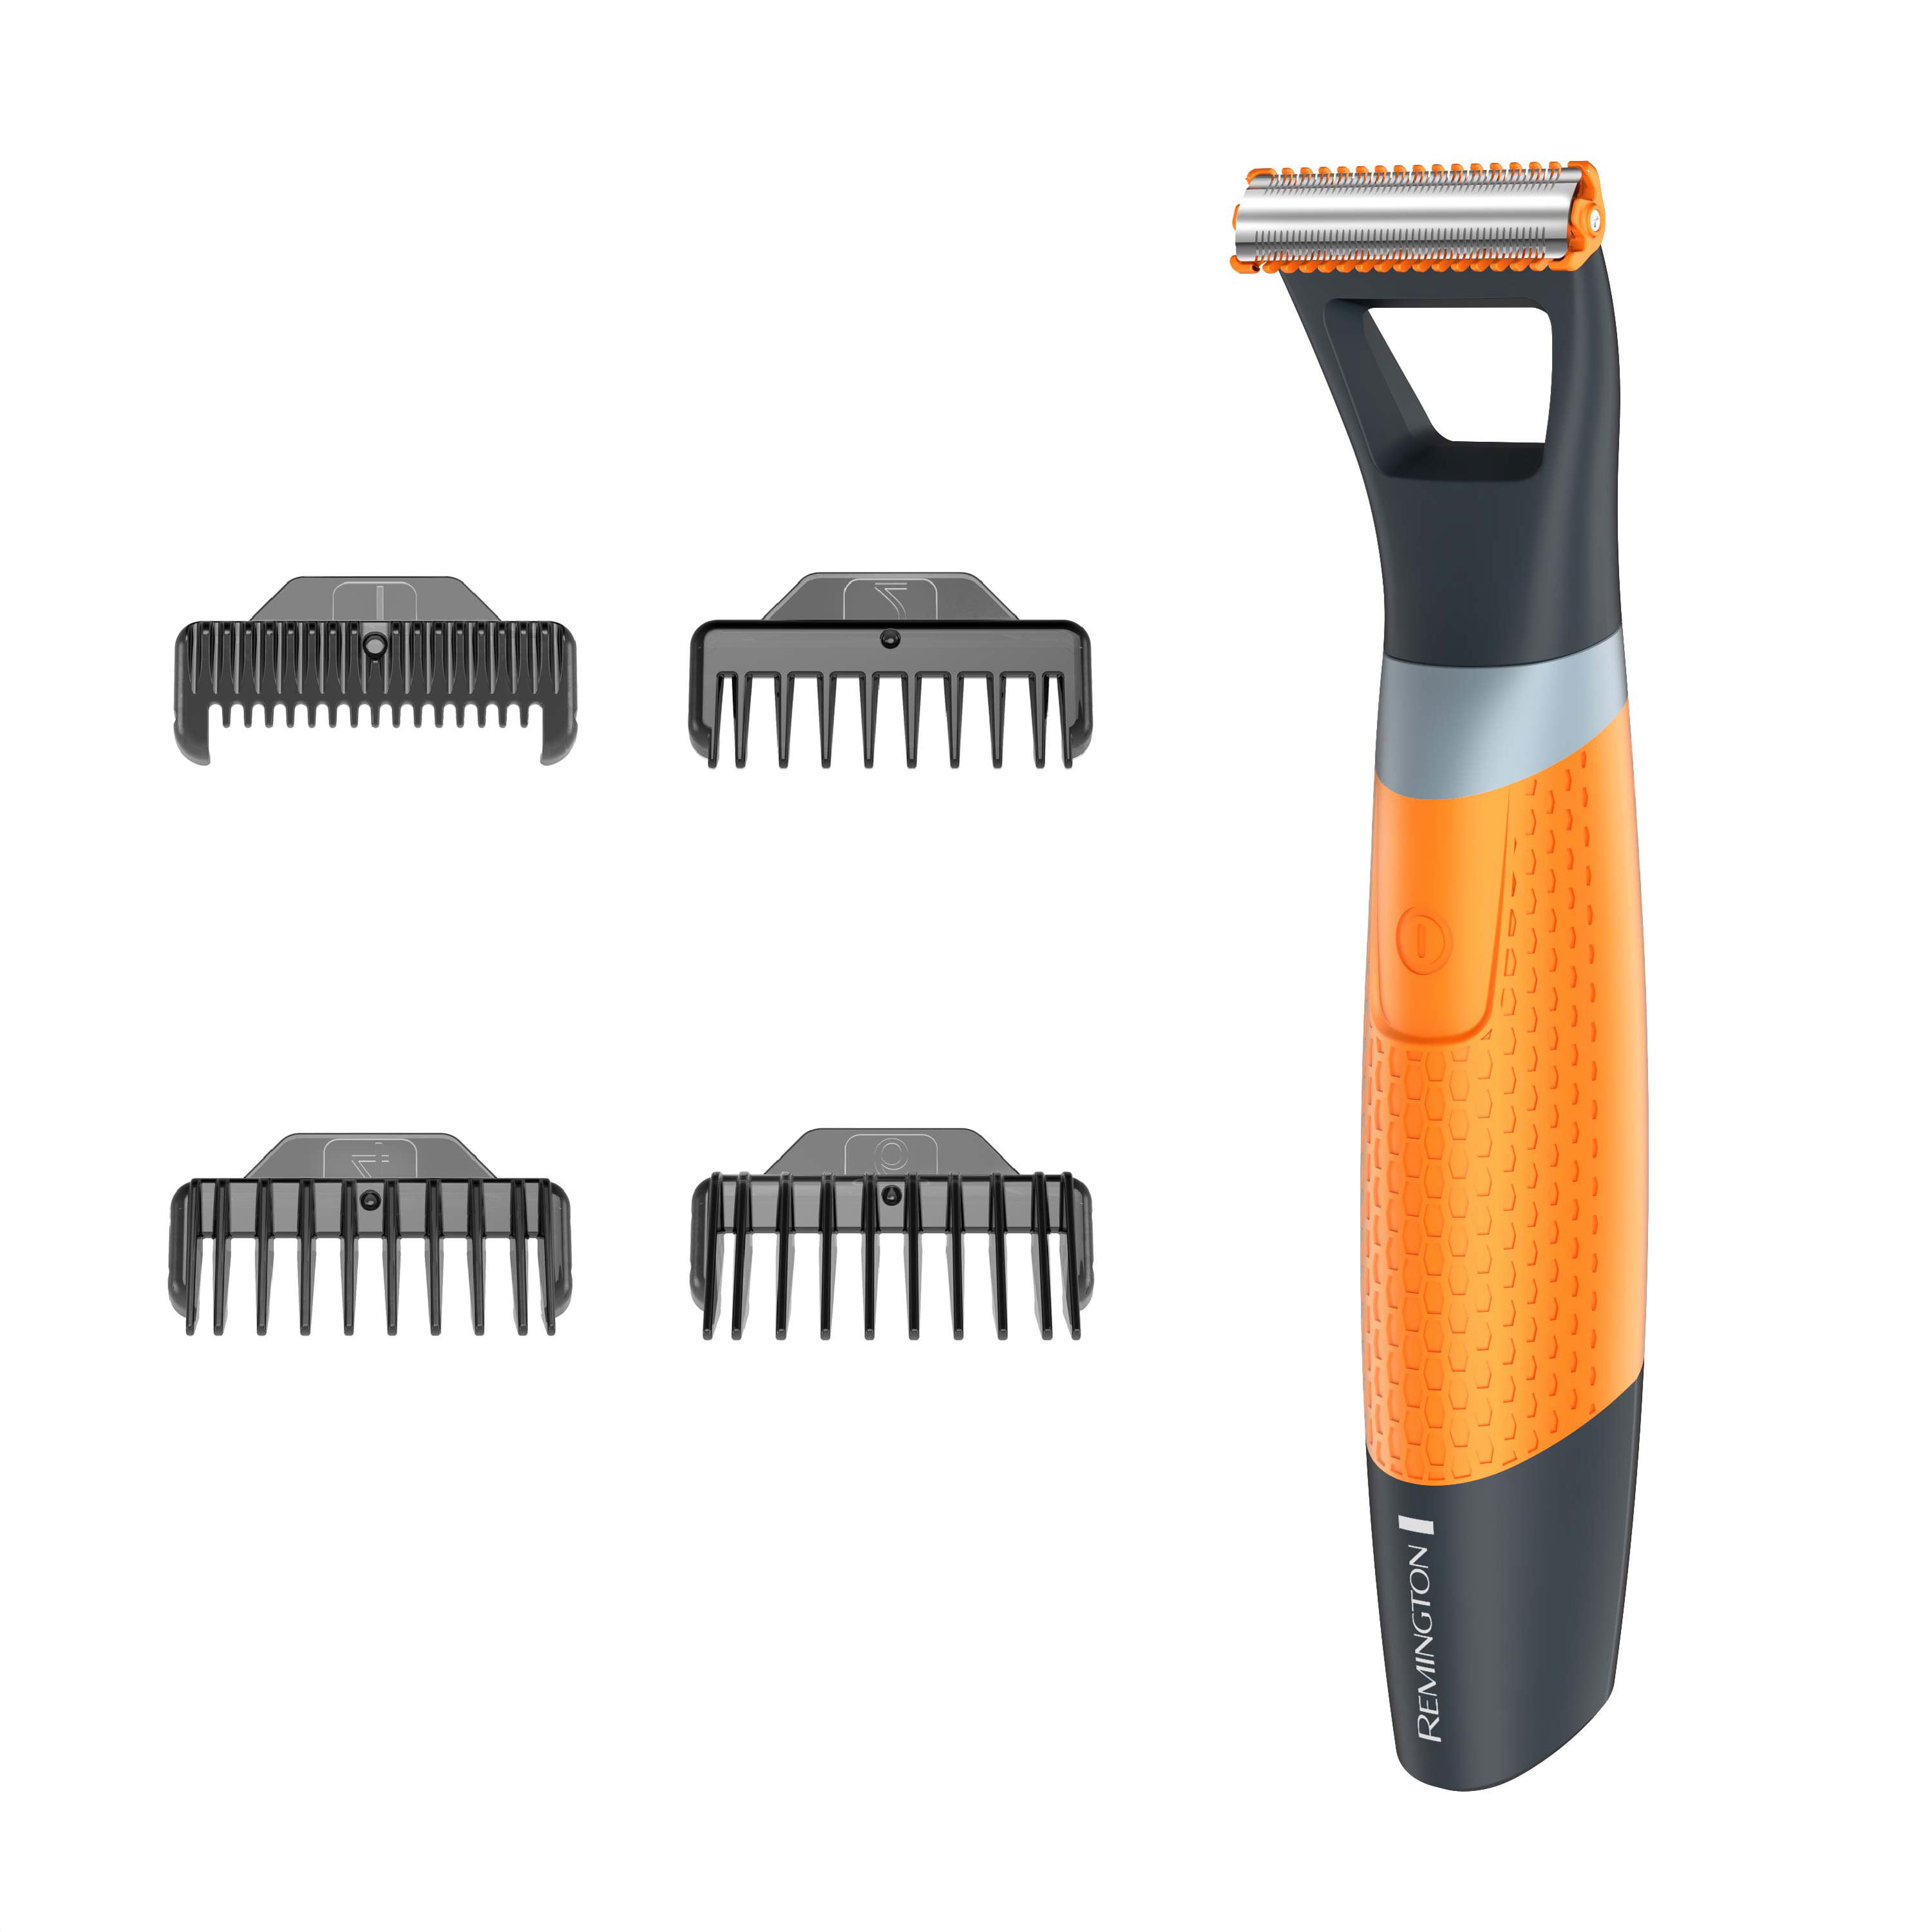 replacement blades for remington hair clippers